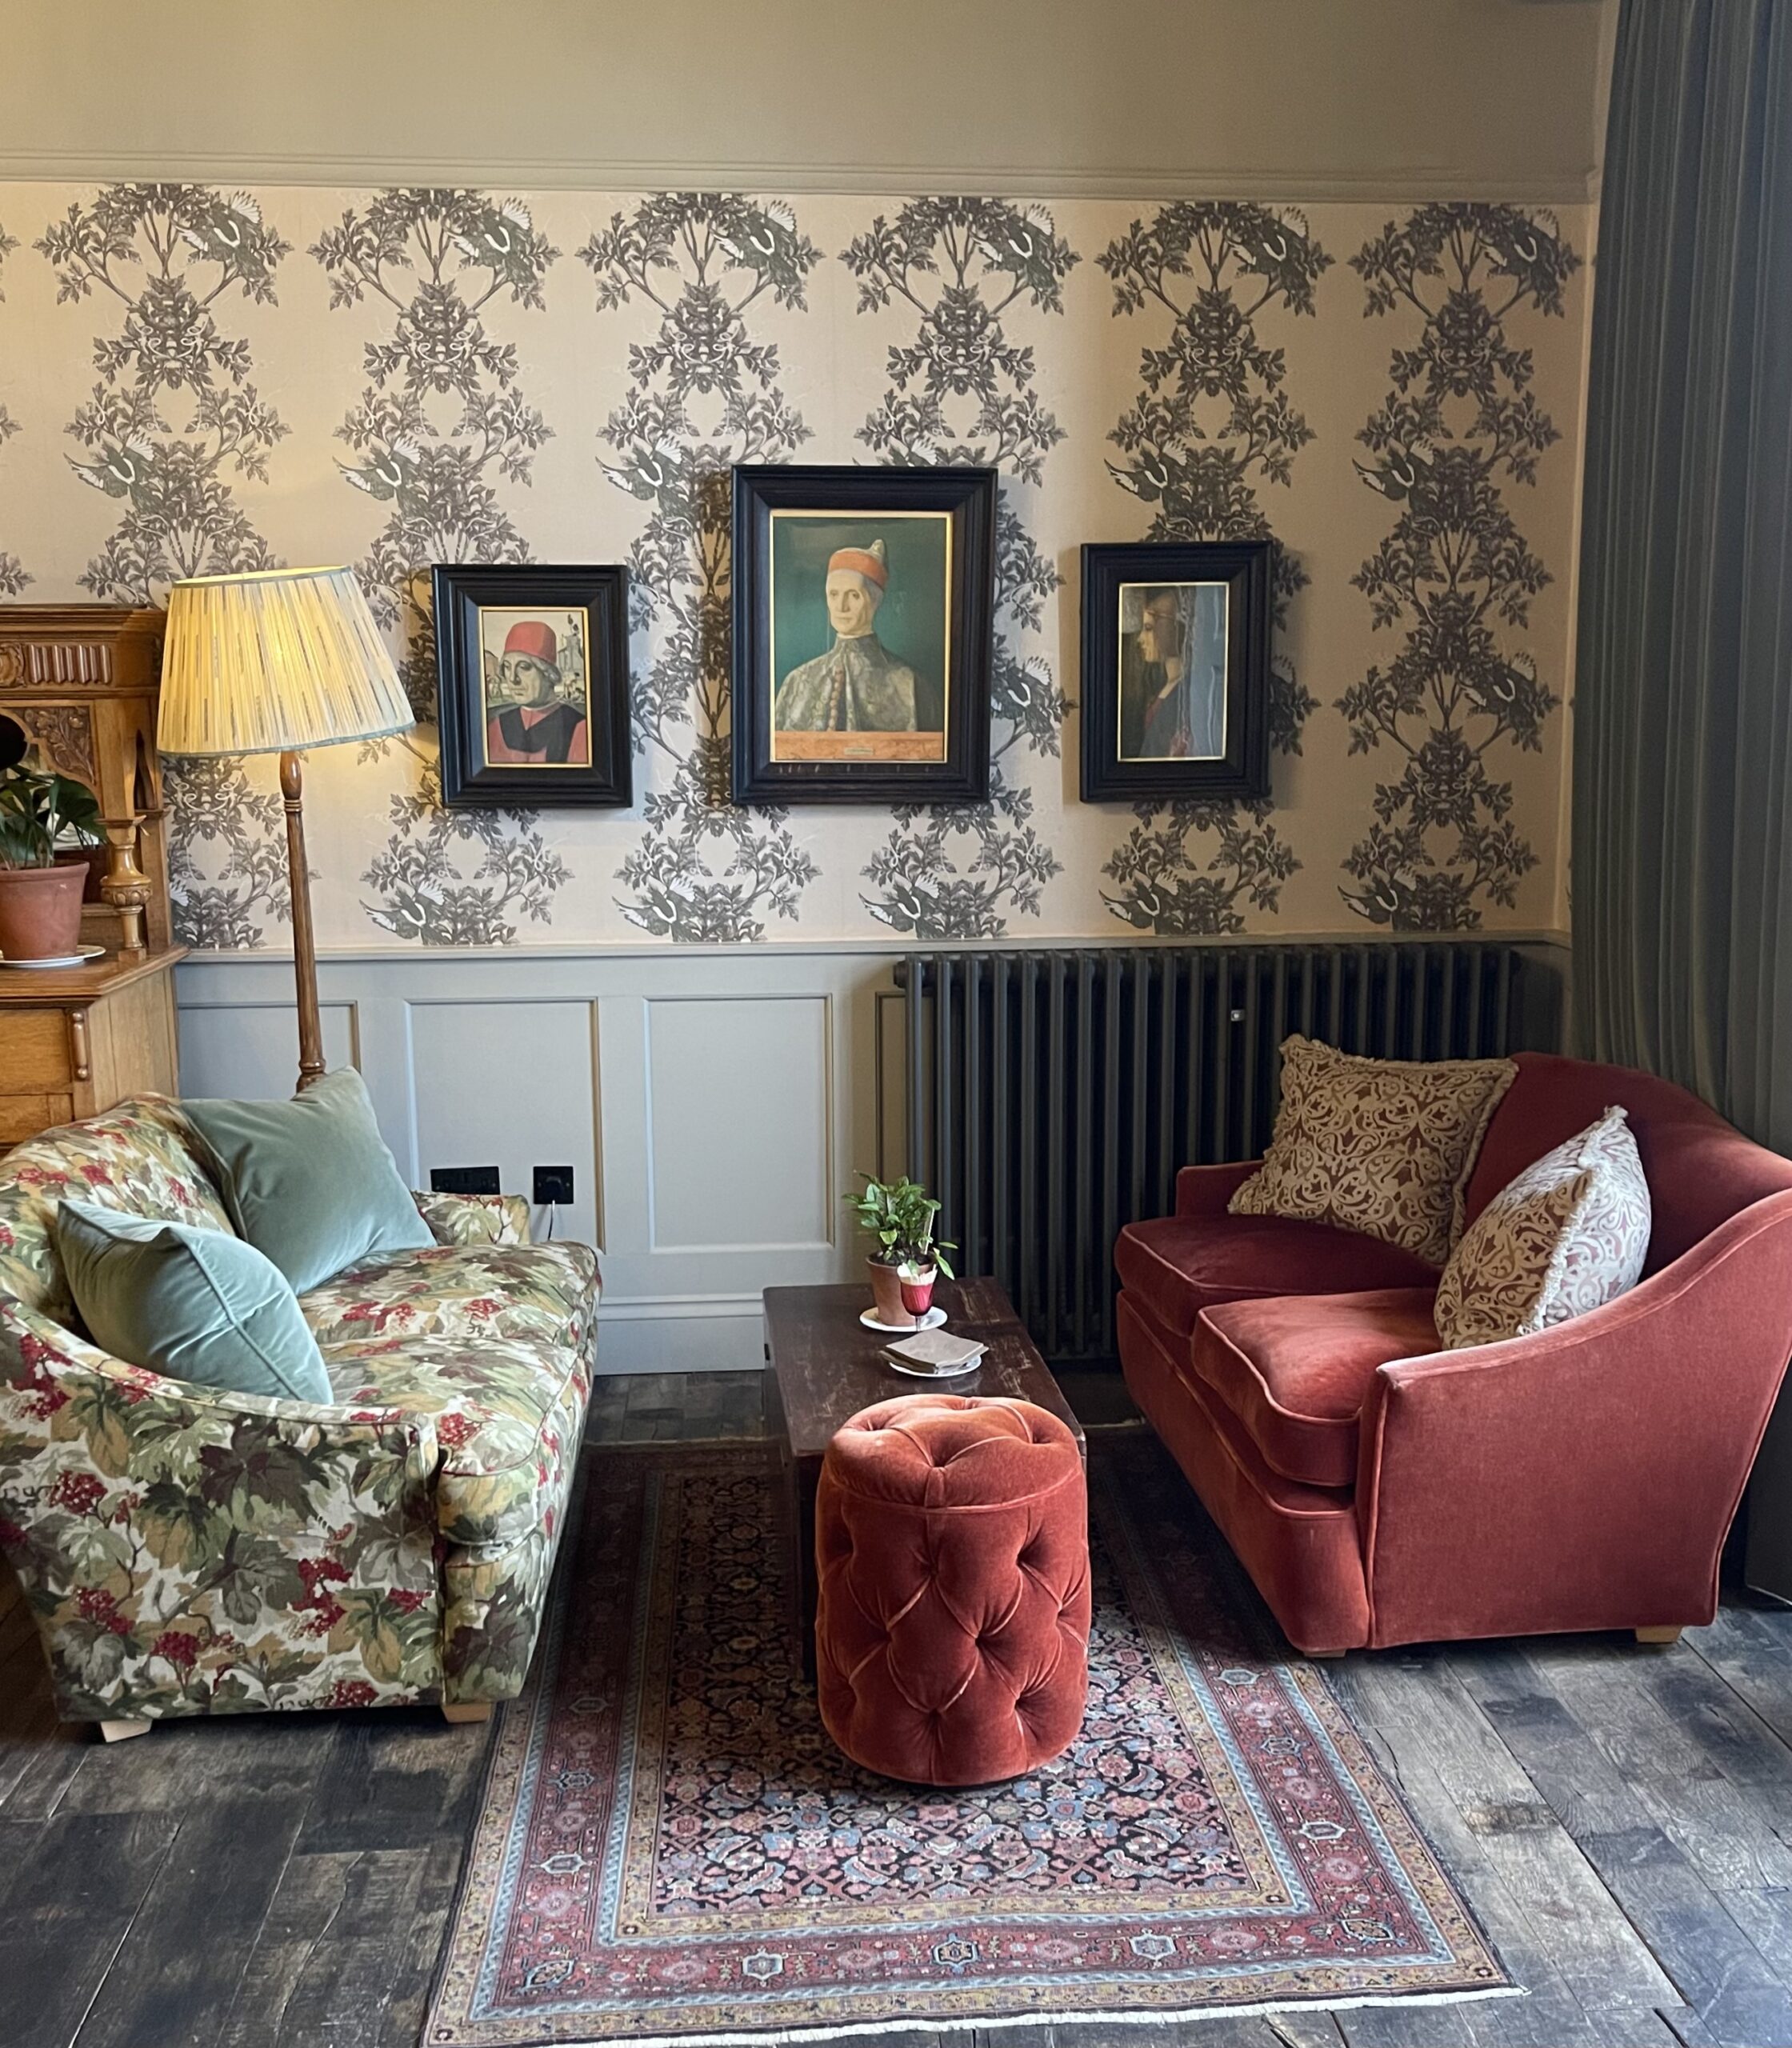 Dive into the world of design inspiration with these top picks from The Pig Hotel at Combe in Devon, hand-picked by a seasoned interior stylist.